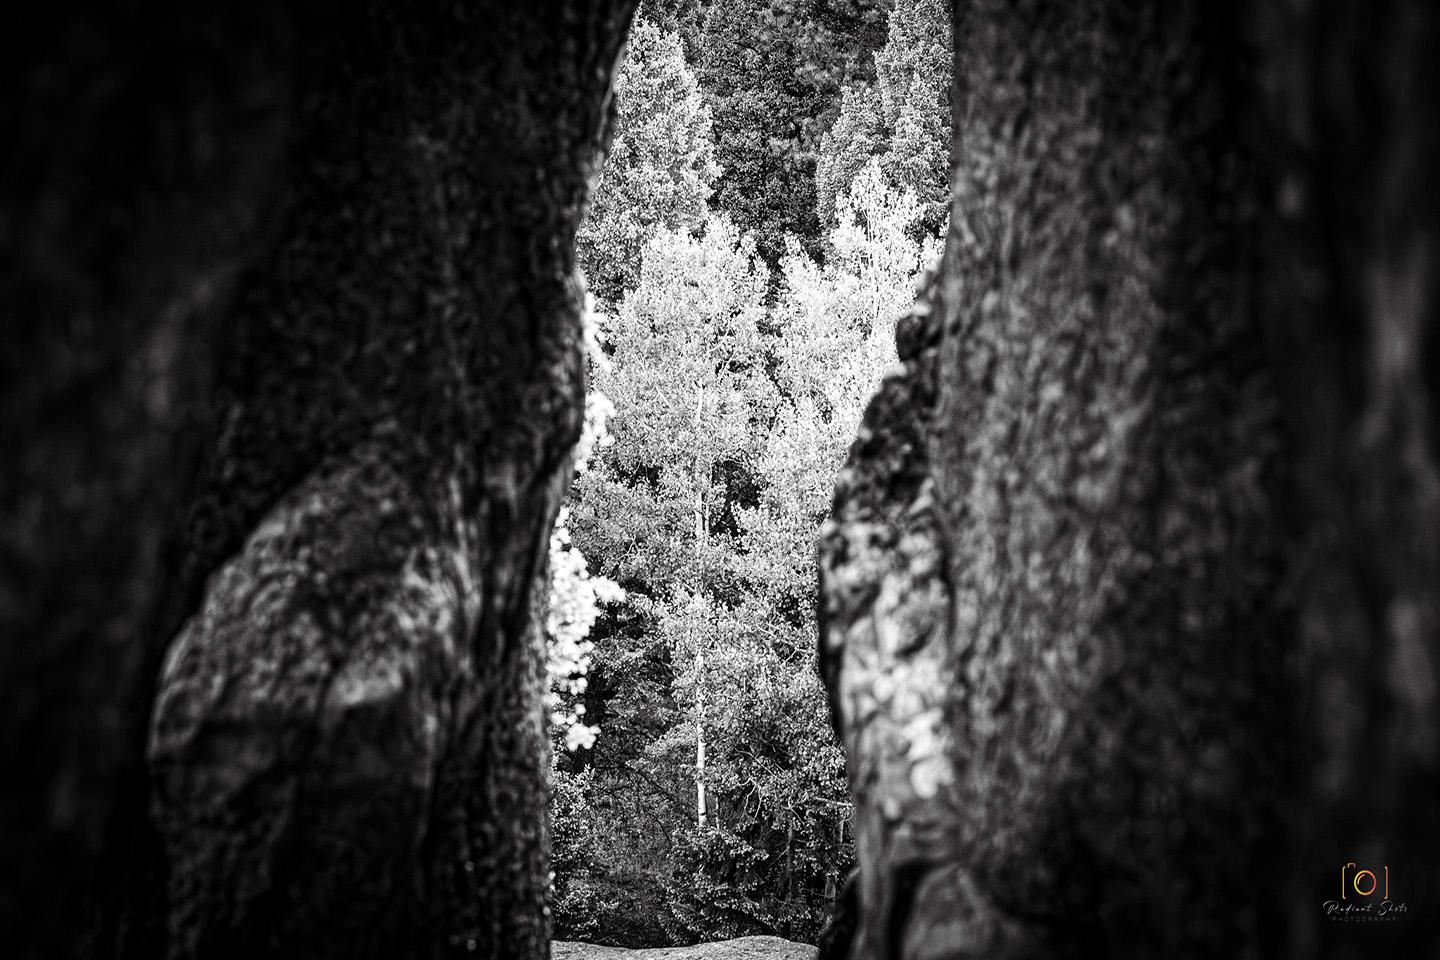 Black and White photograph of a view focusing on a single tree through a slot canyon